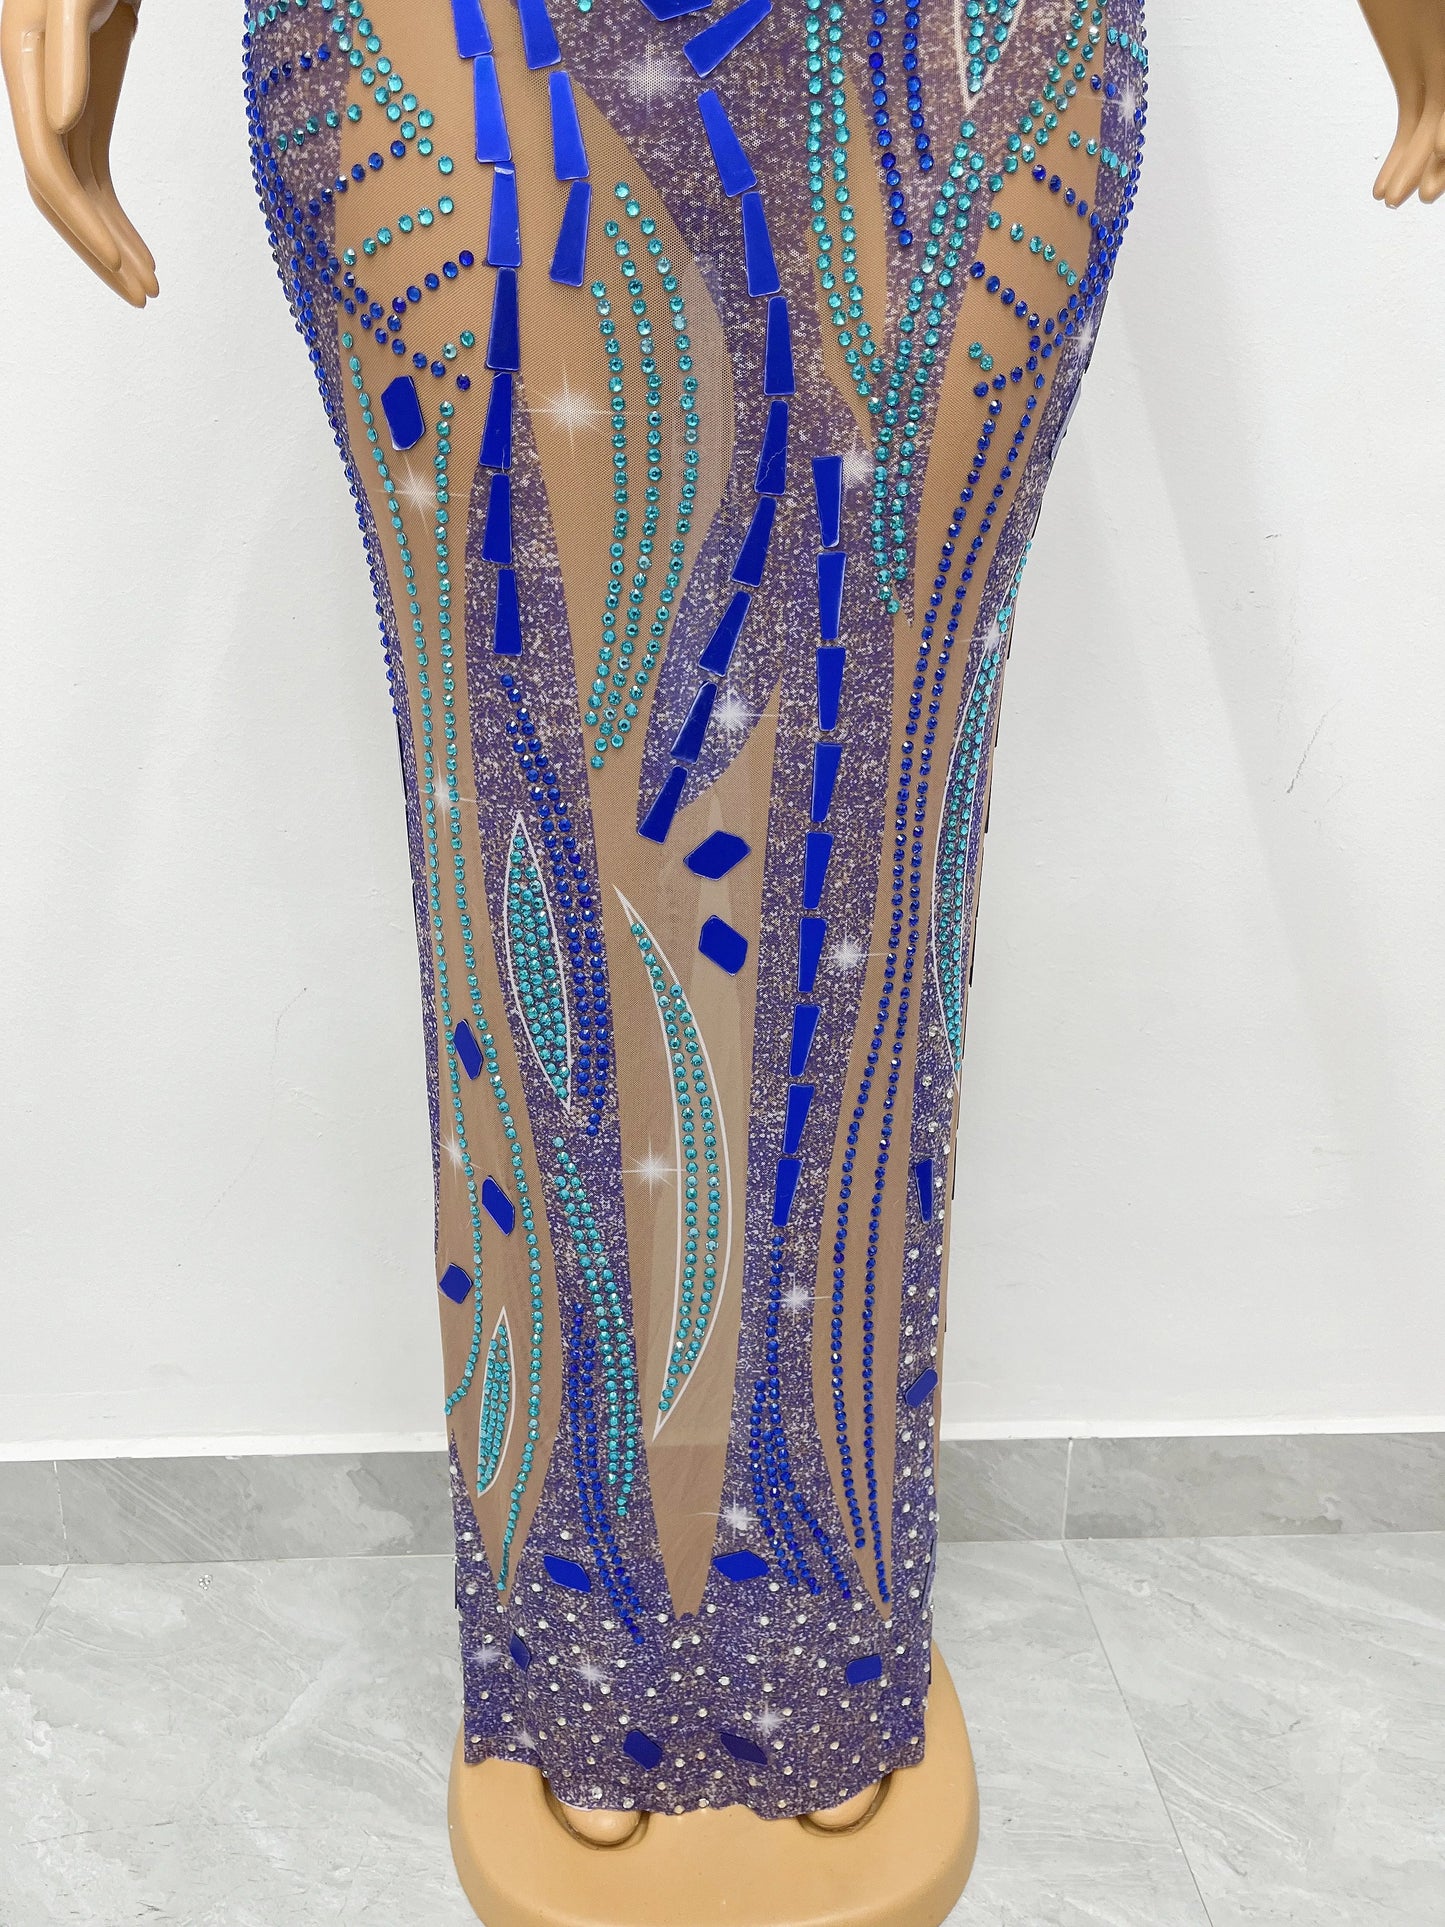 Behold! The "Sapphire Scepter" Rhinestone Gown